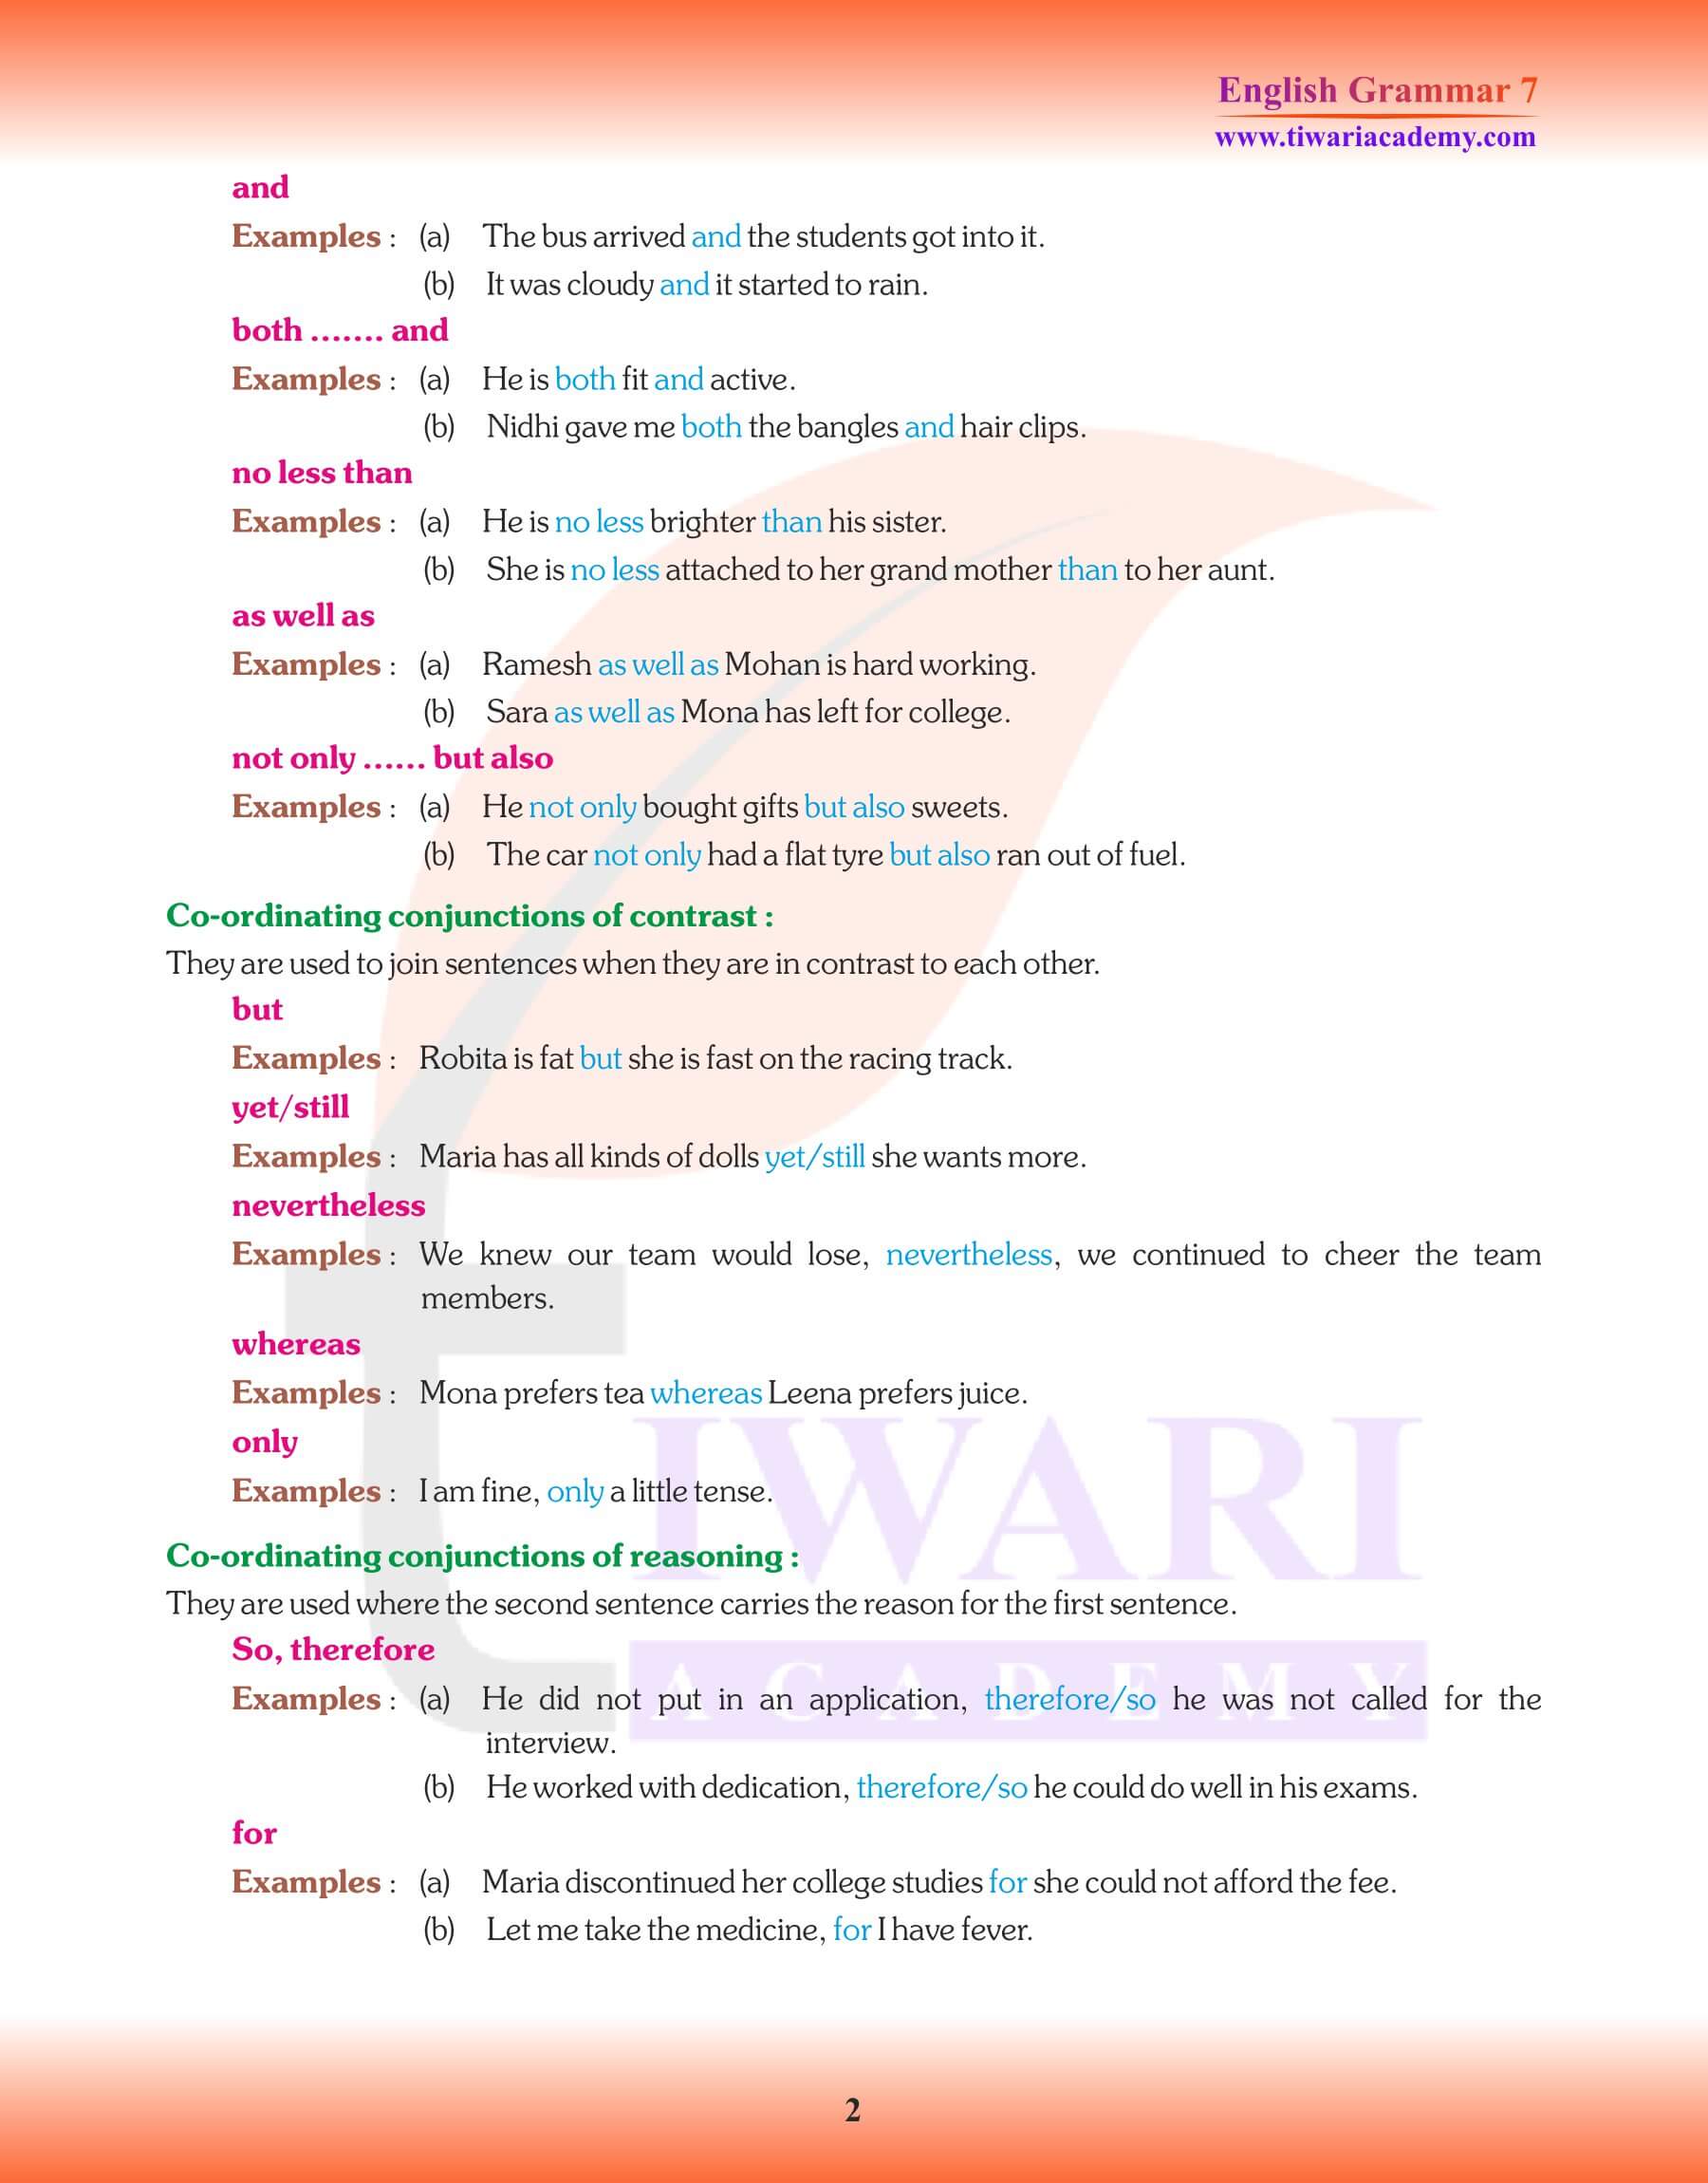 Class 7 English Grammar Chapter 15 Revision Notes